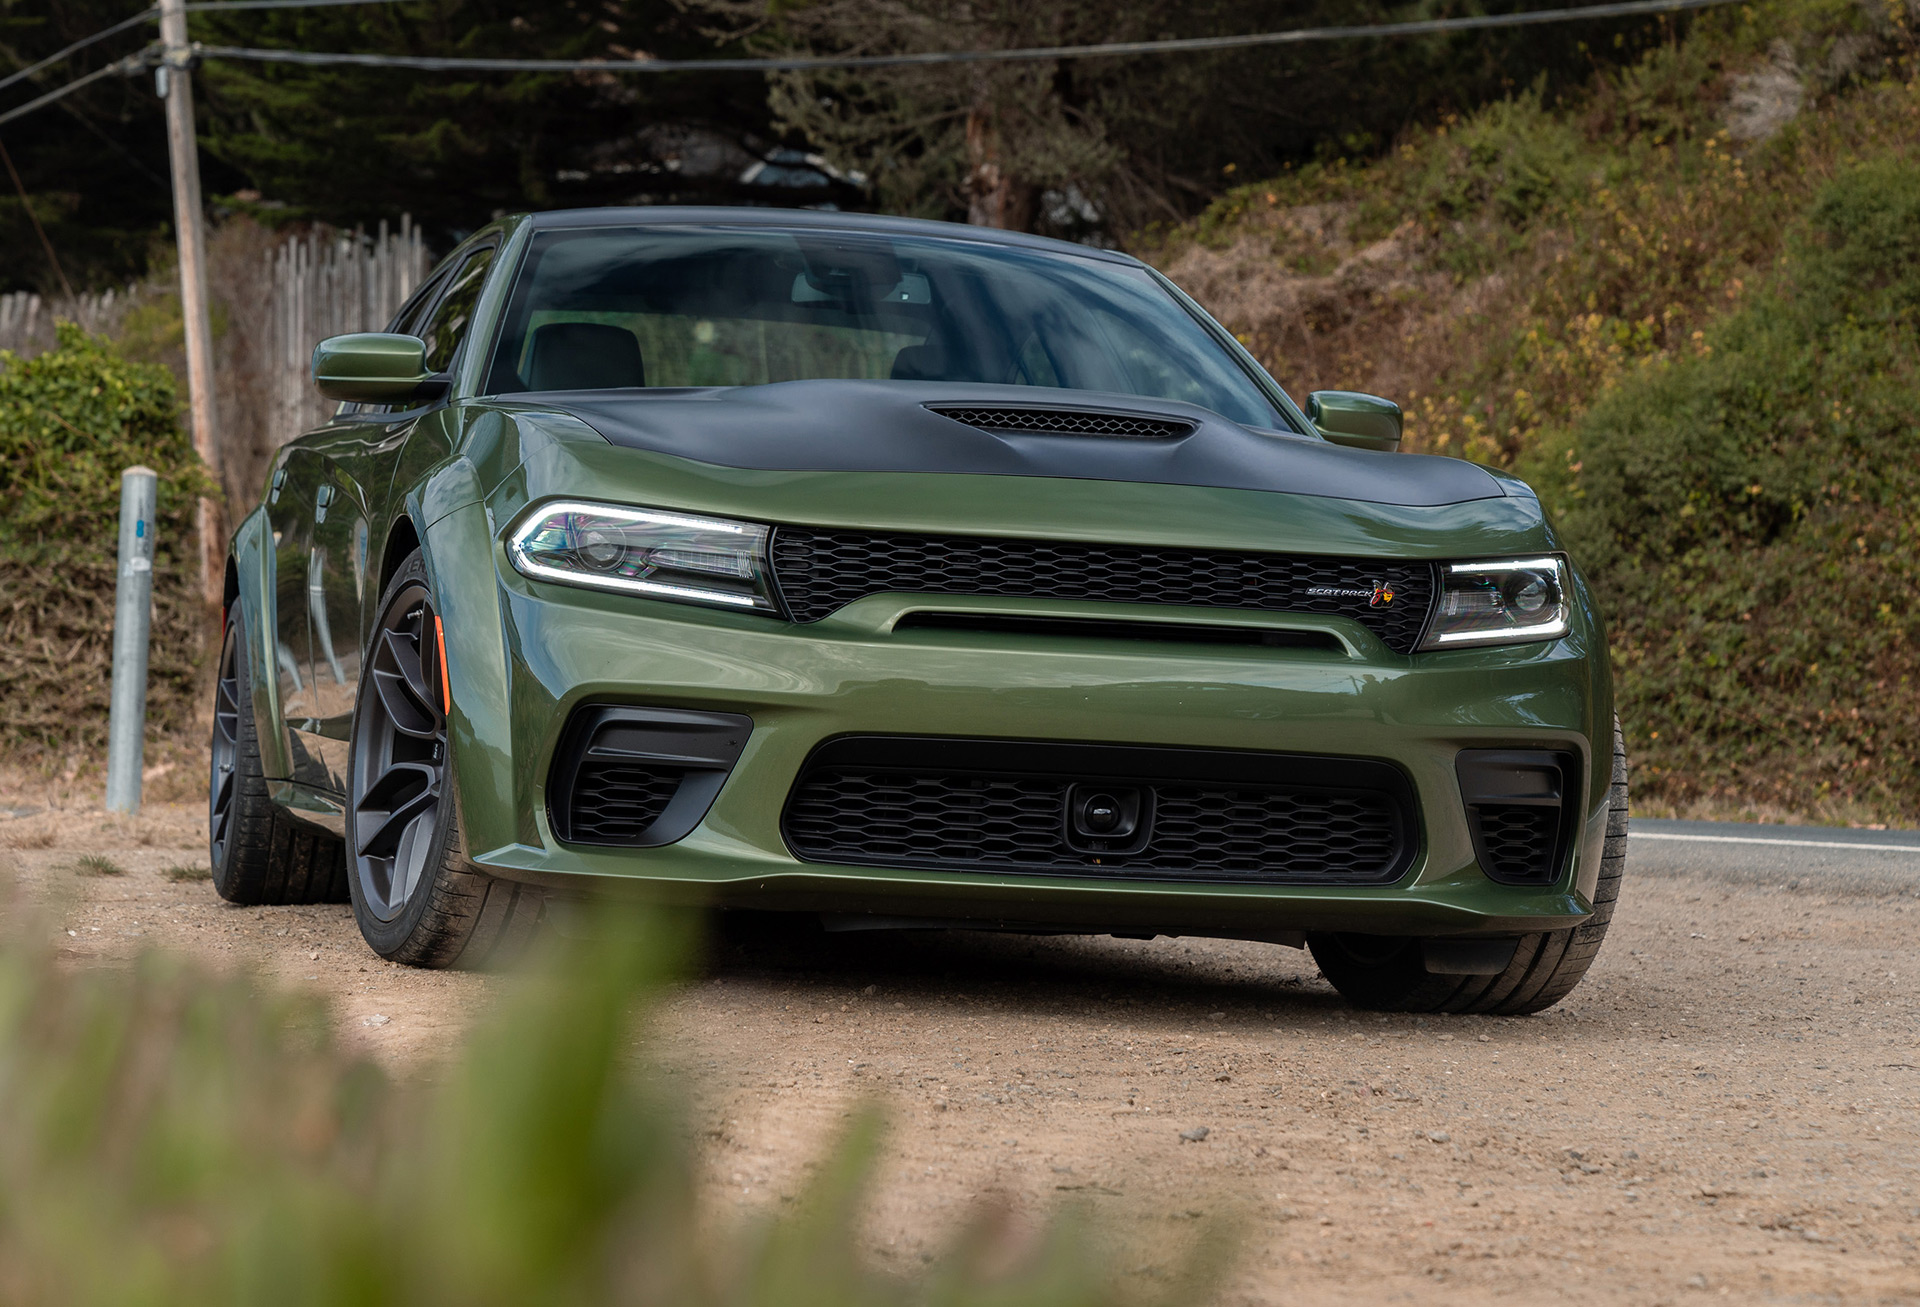 Preview: 2022 Dodge Charger offers up more customization